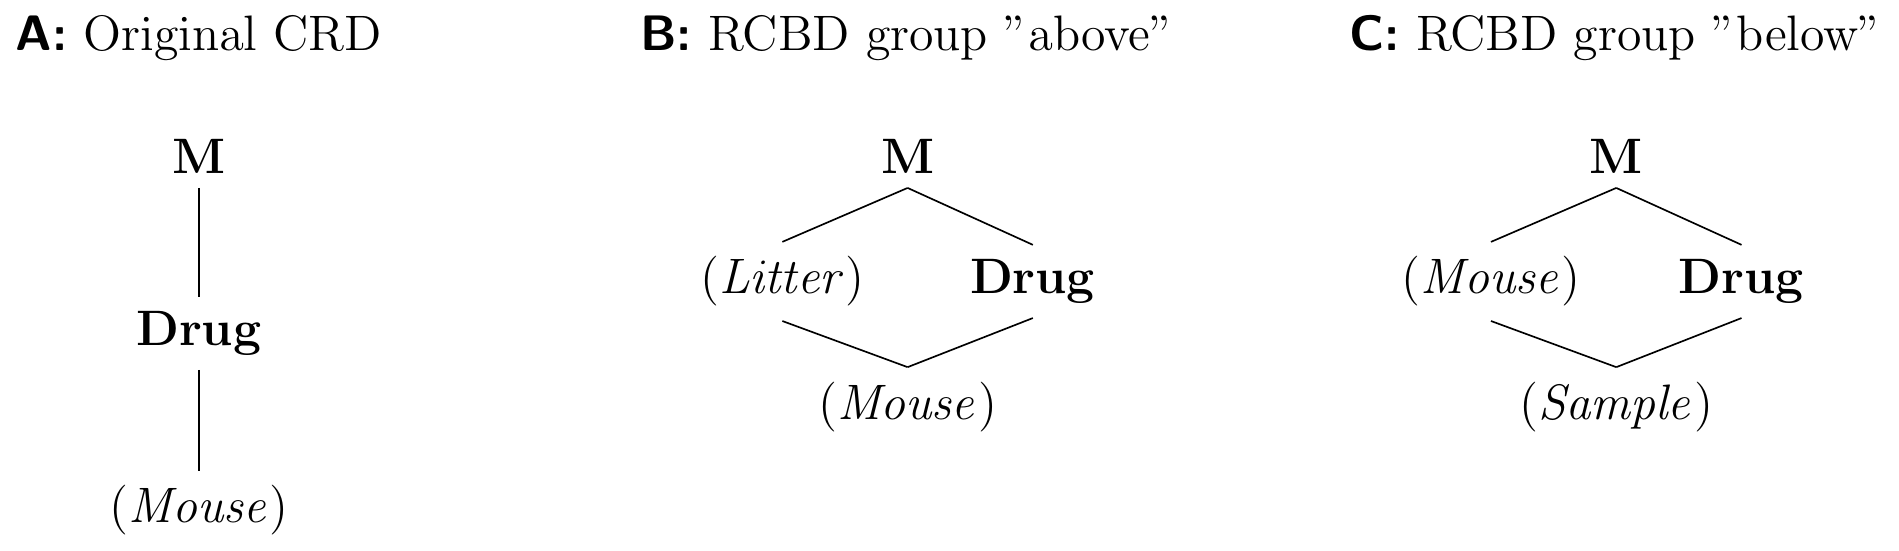 Creating a randomized complete block design from a completely randomized design. A: A CRD randomizes drugs on mice. B: Introducing a blocking factor 'above' groups the experimental units. C: Subdividing each experimental units and randomizing the treatments on the lower level creates a new experimental unit factor 'below'.